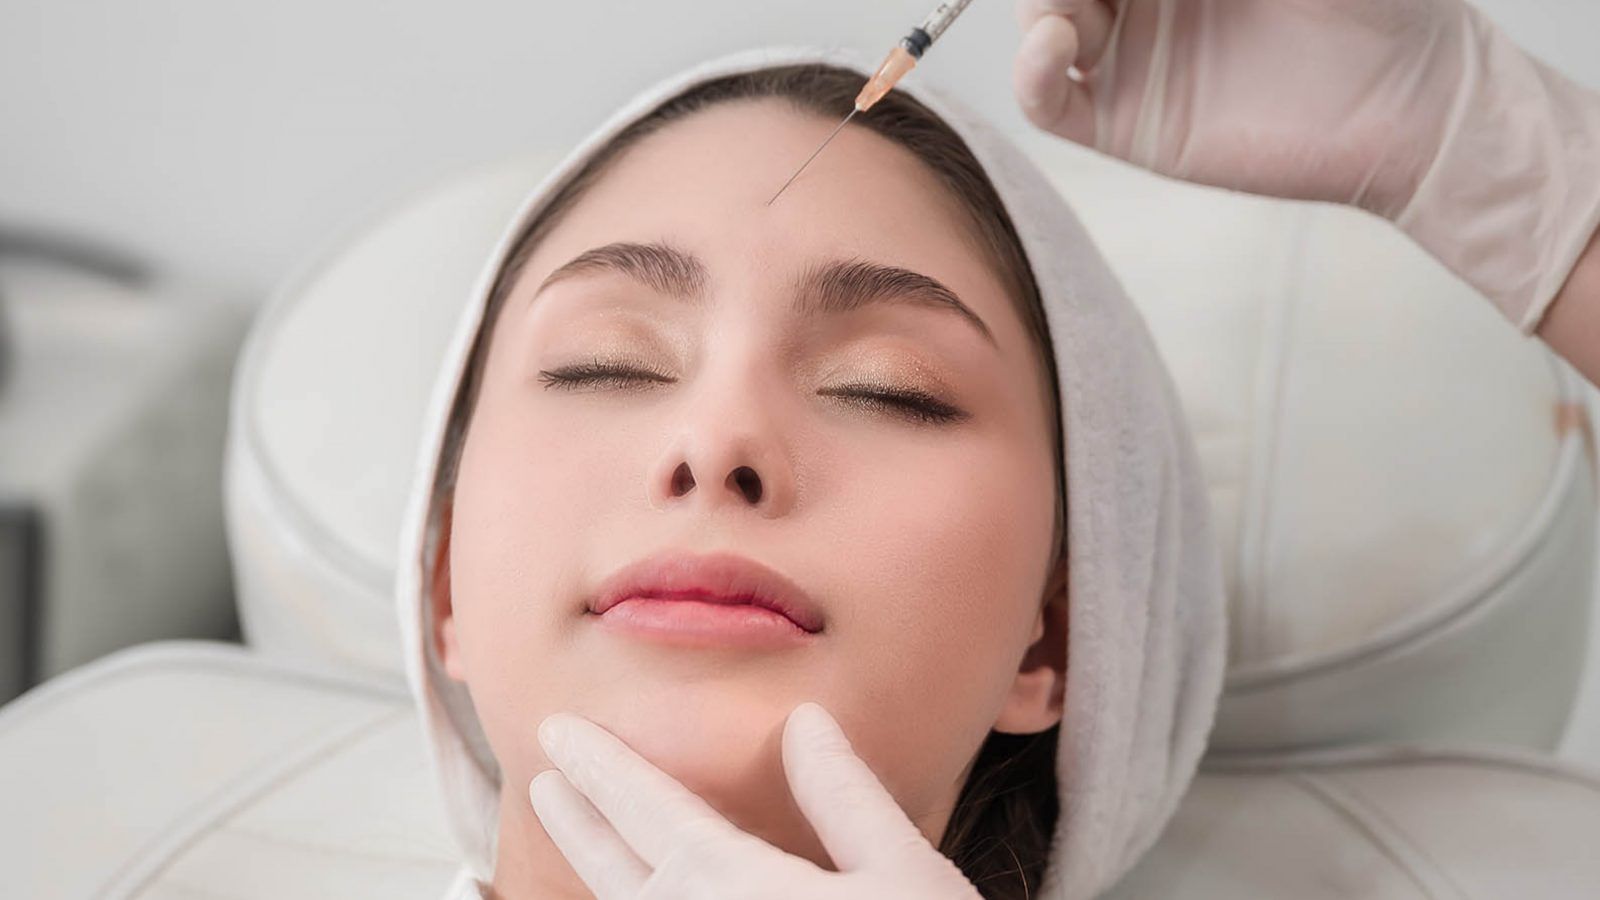 Dr Lisa Chan on Facial Fillers and the Art of Feeling Good